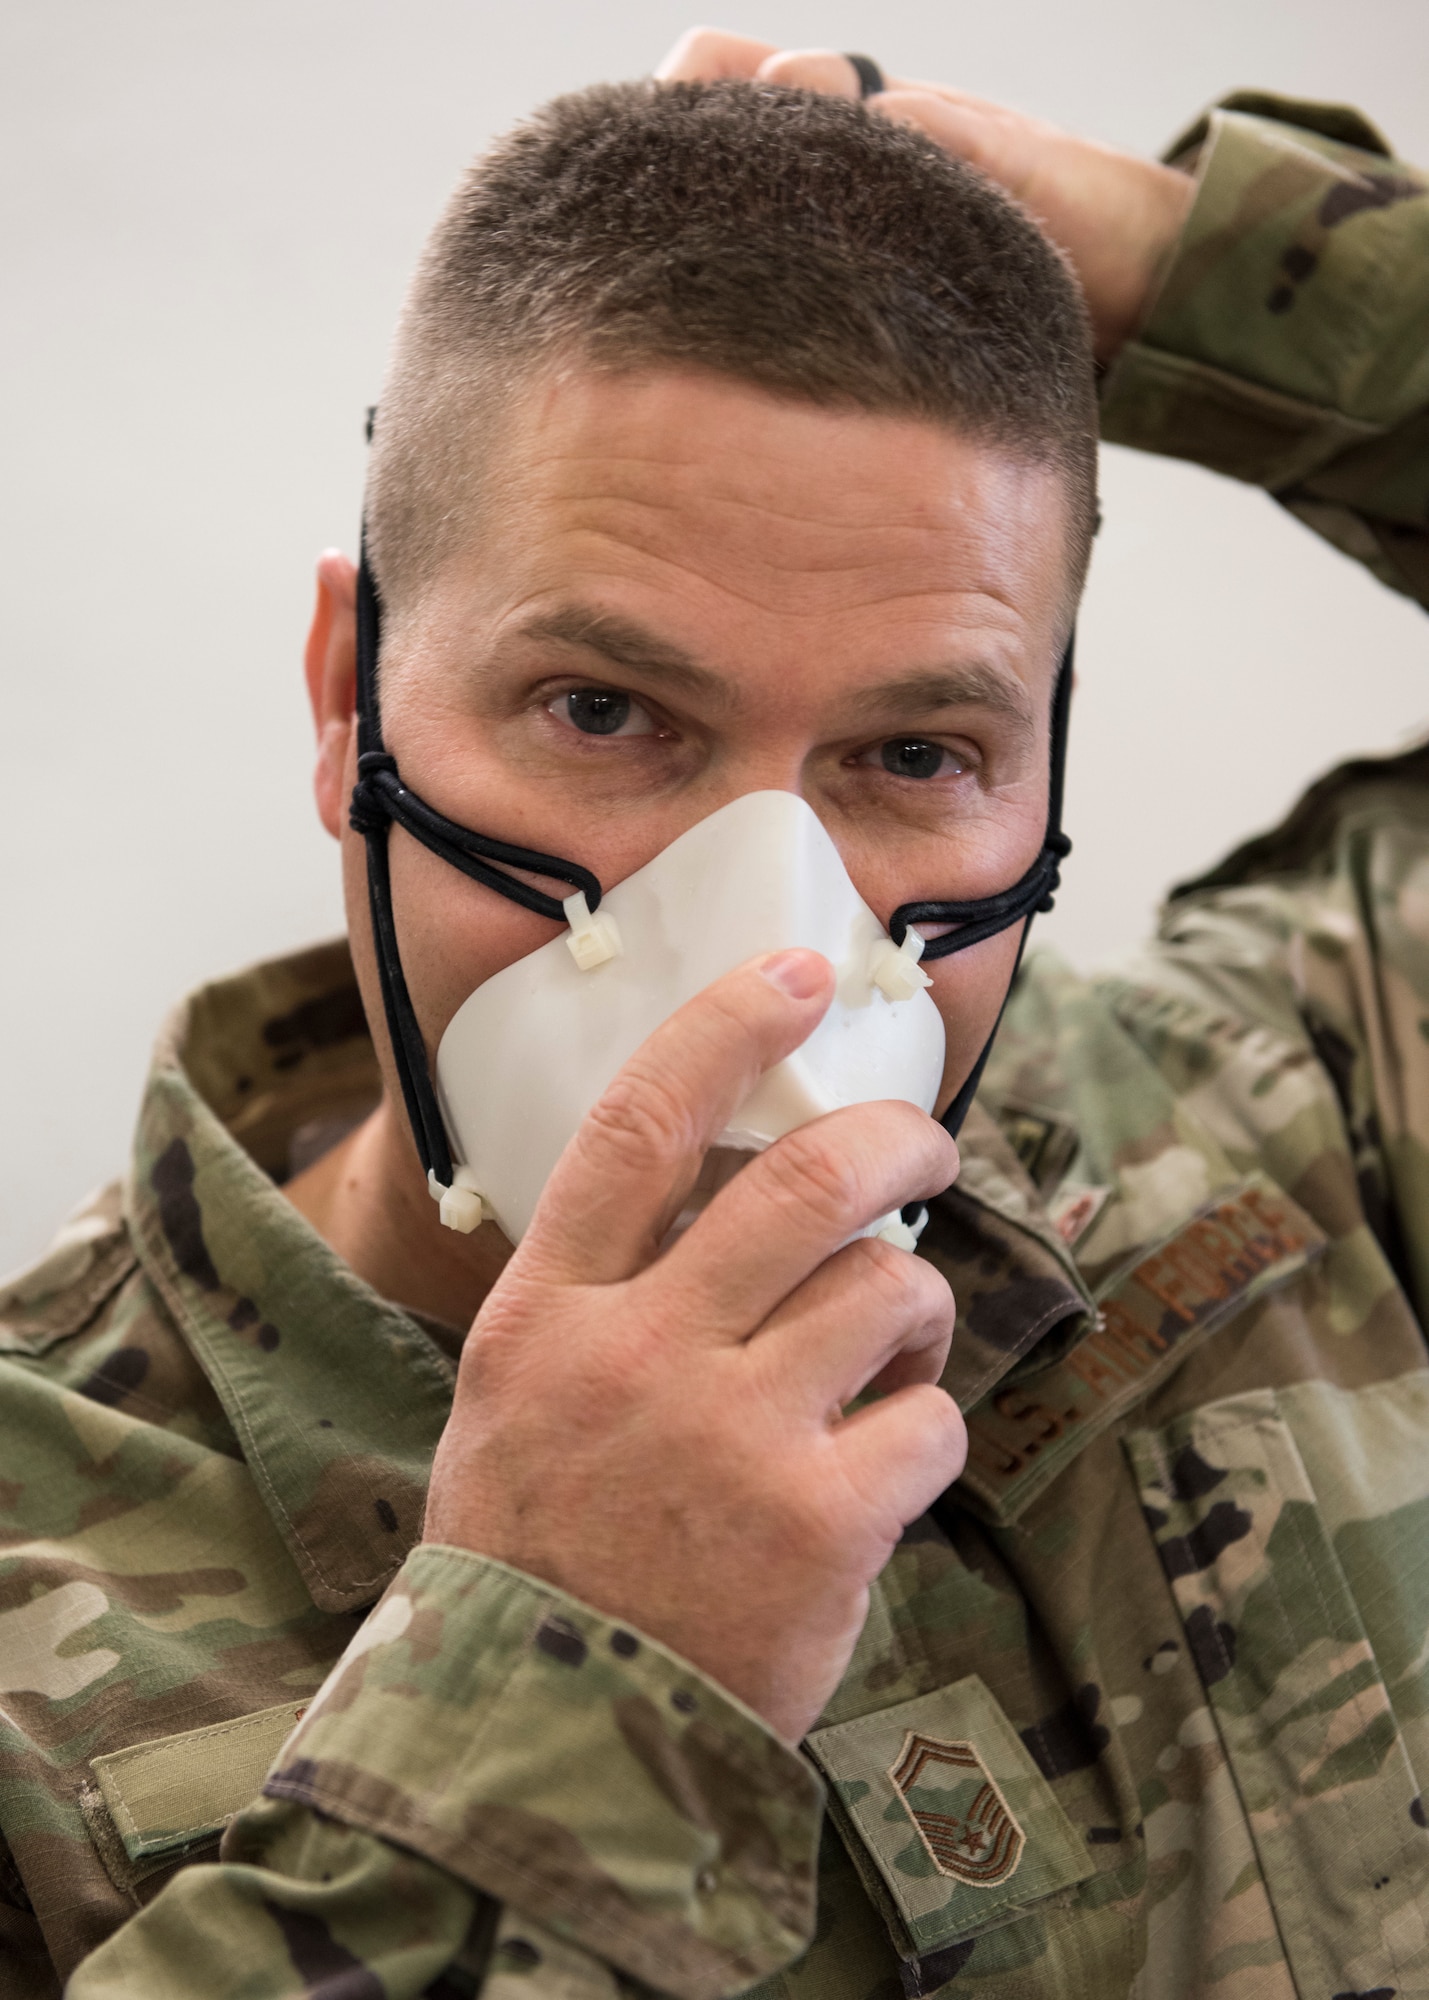 An Airman puts on a mask.